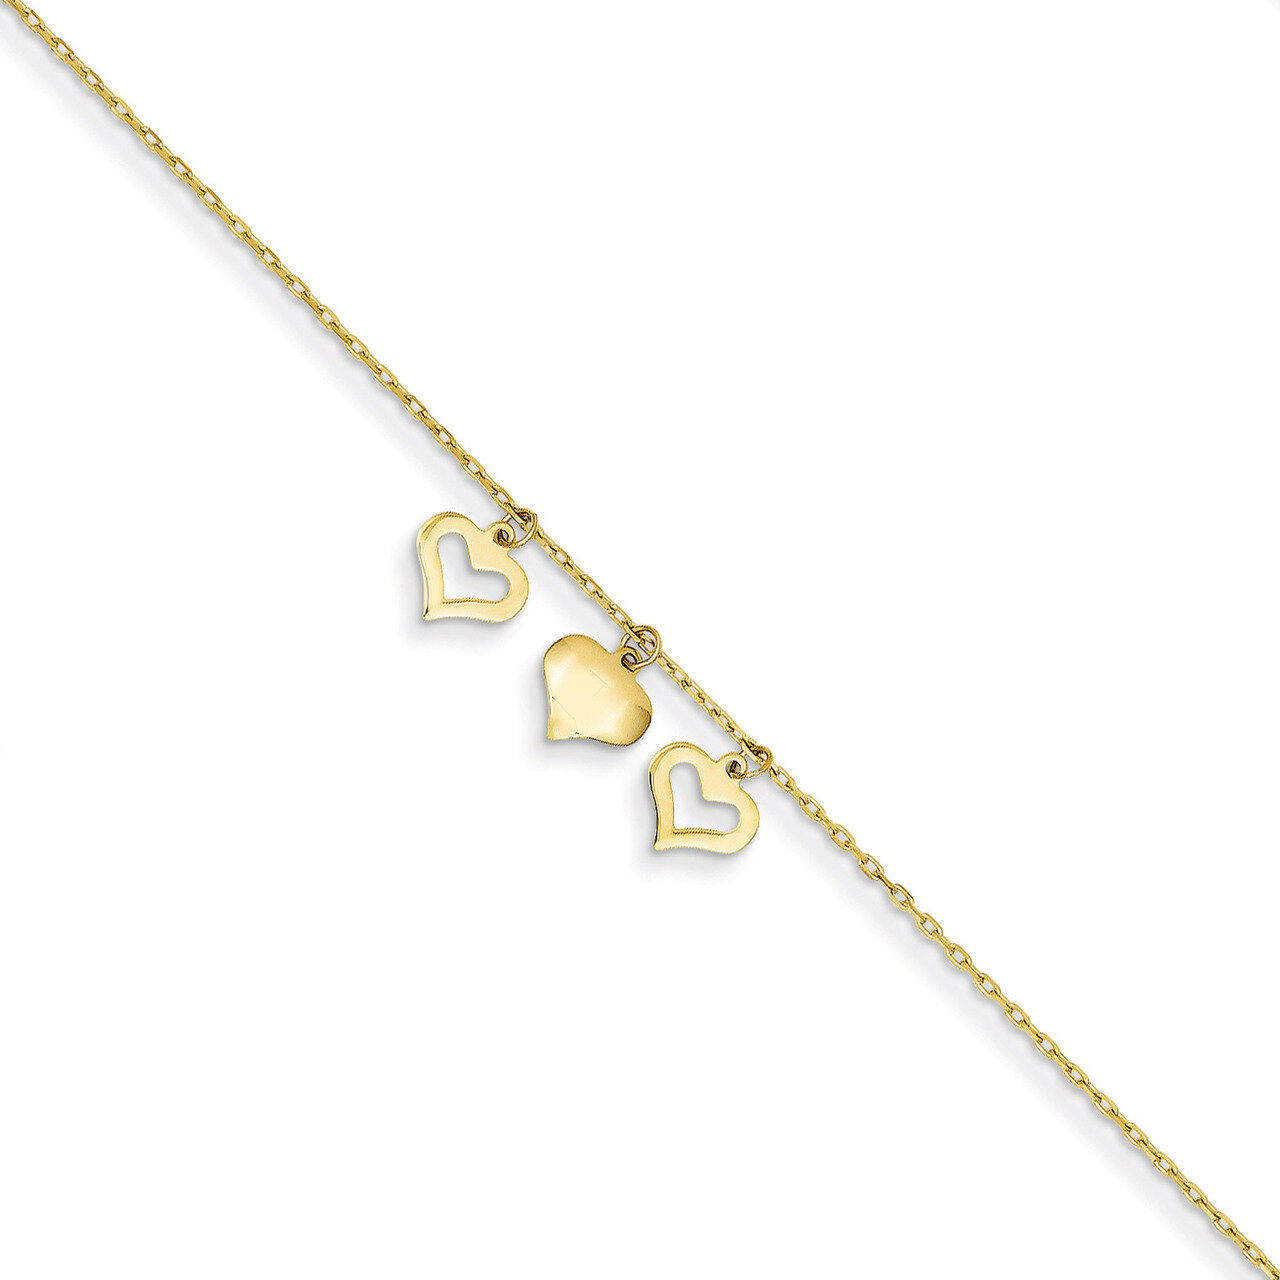 3 Hearts with 1 inch Extension Anklet 10 Inch 14k Gold ANK233-10